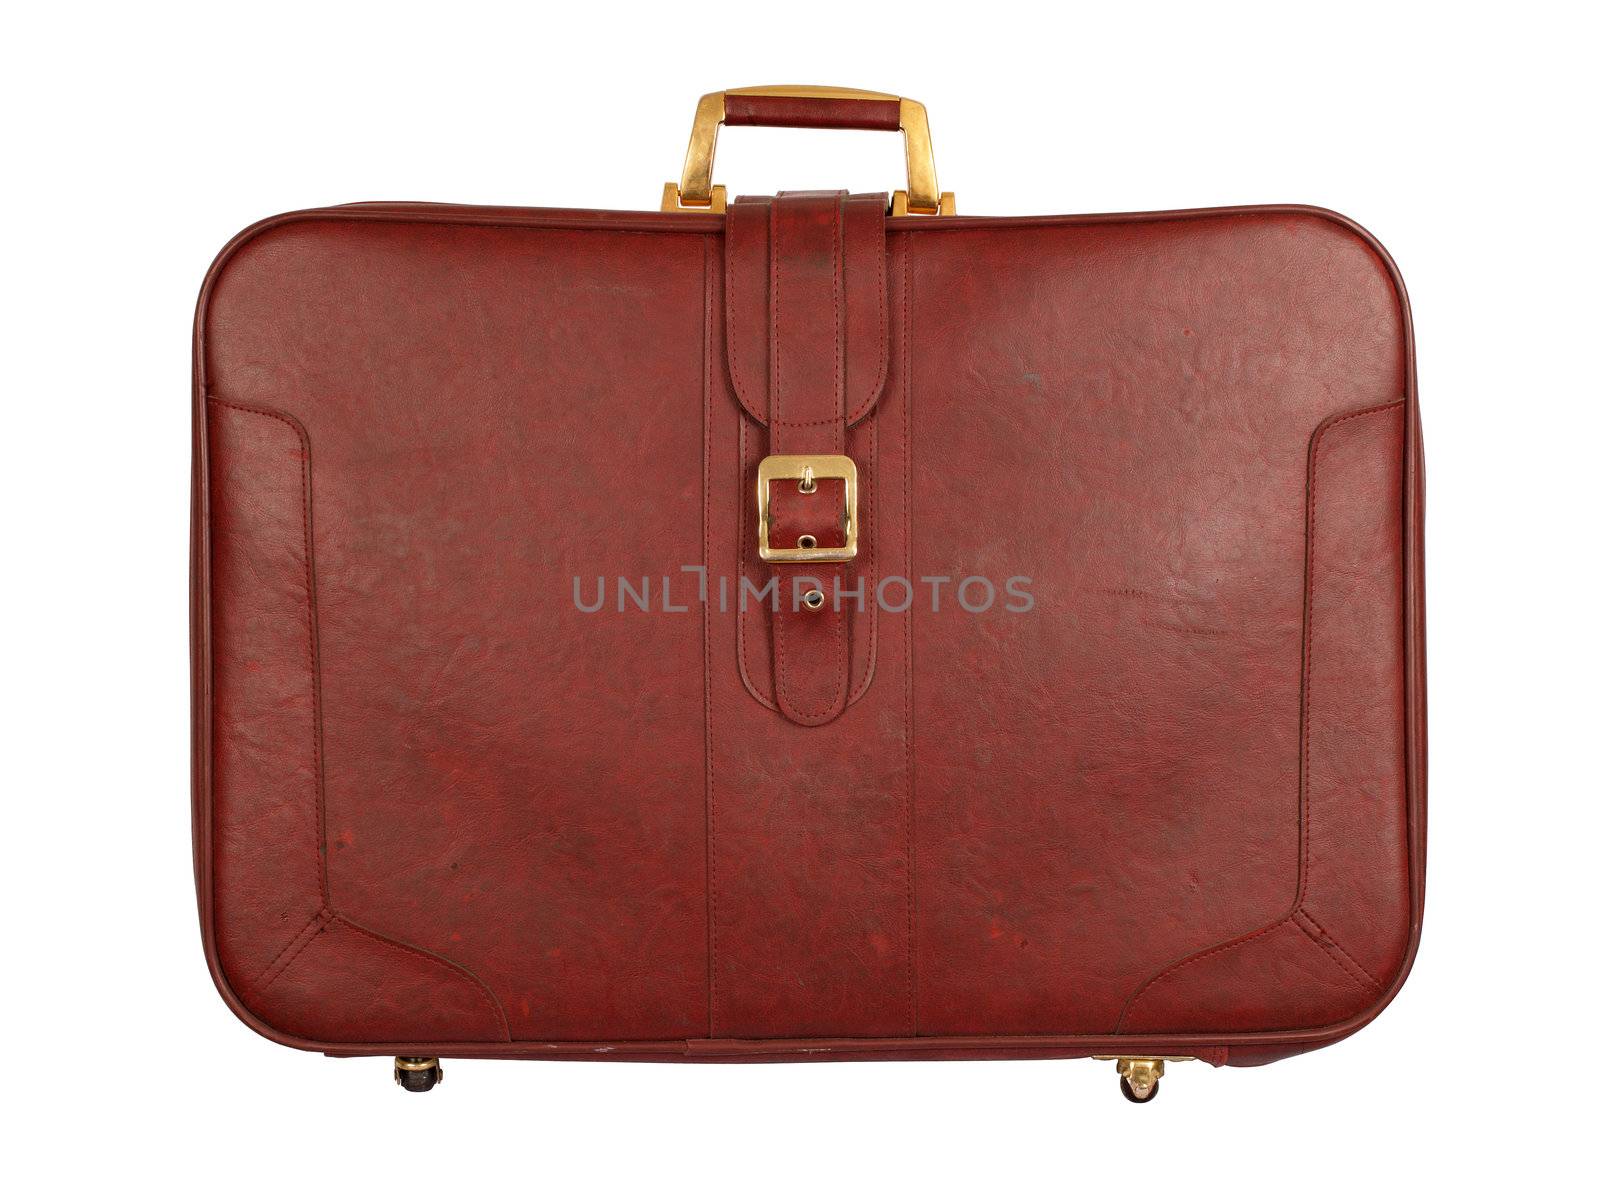 An old suitcase from the seventies.  Isolated with clipping path included.
